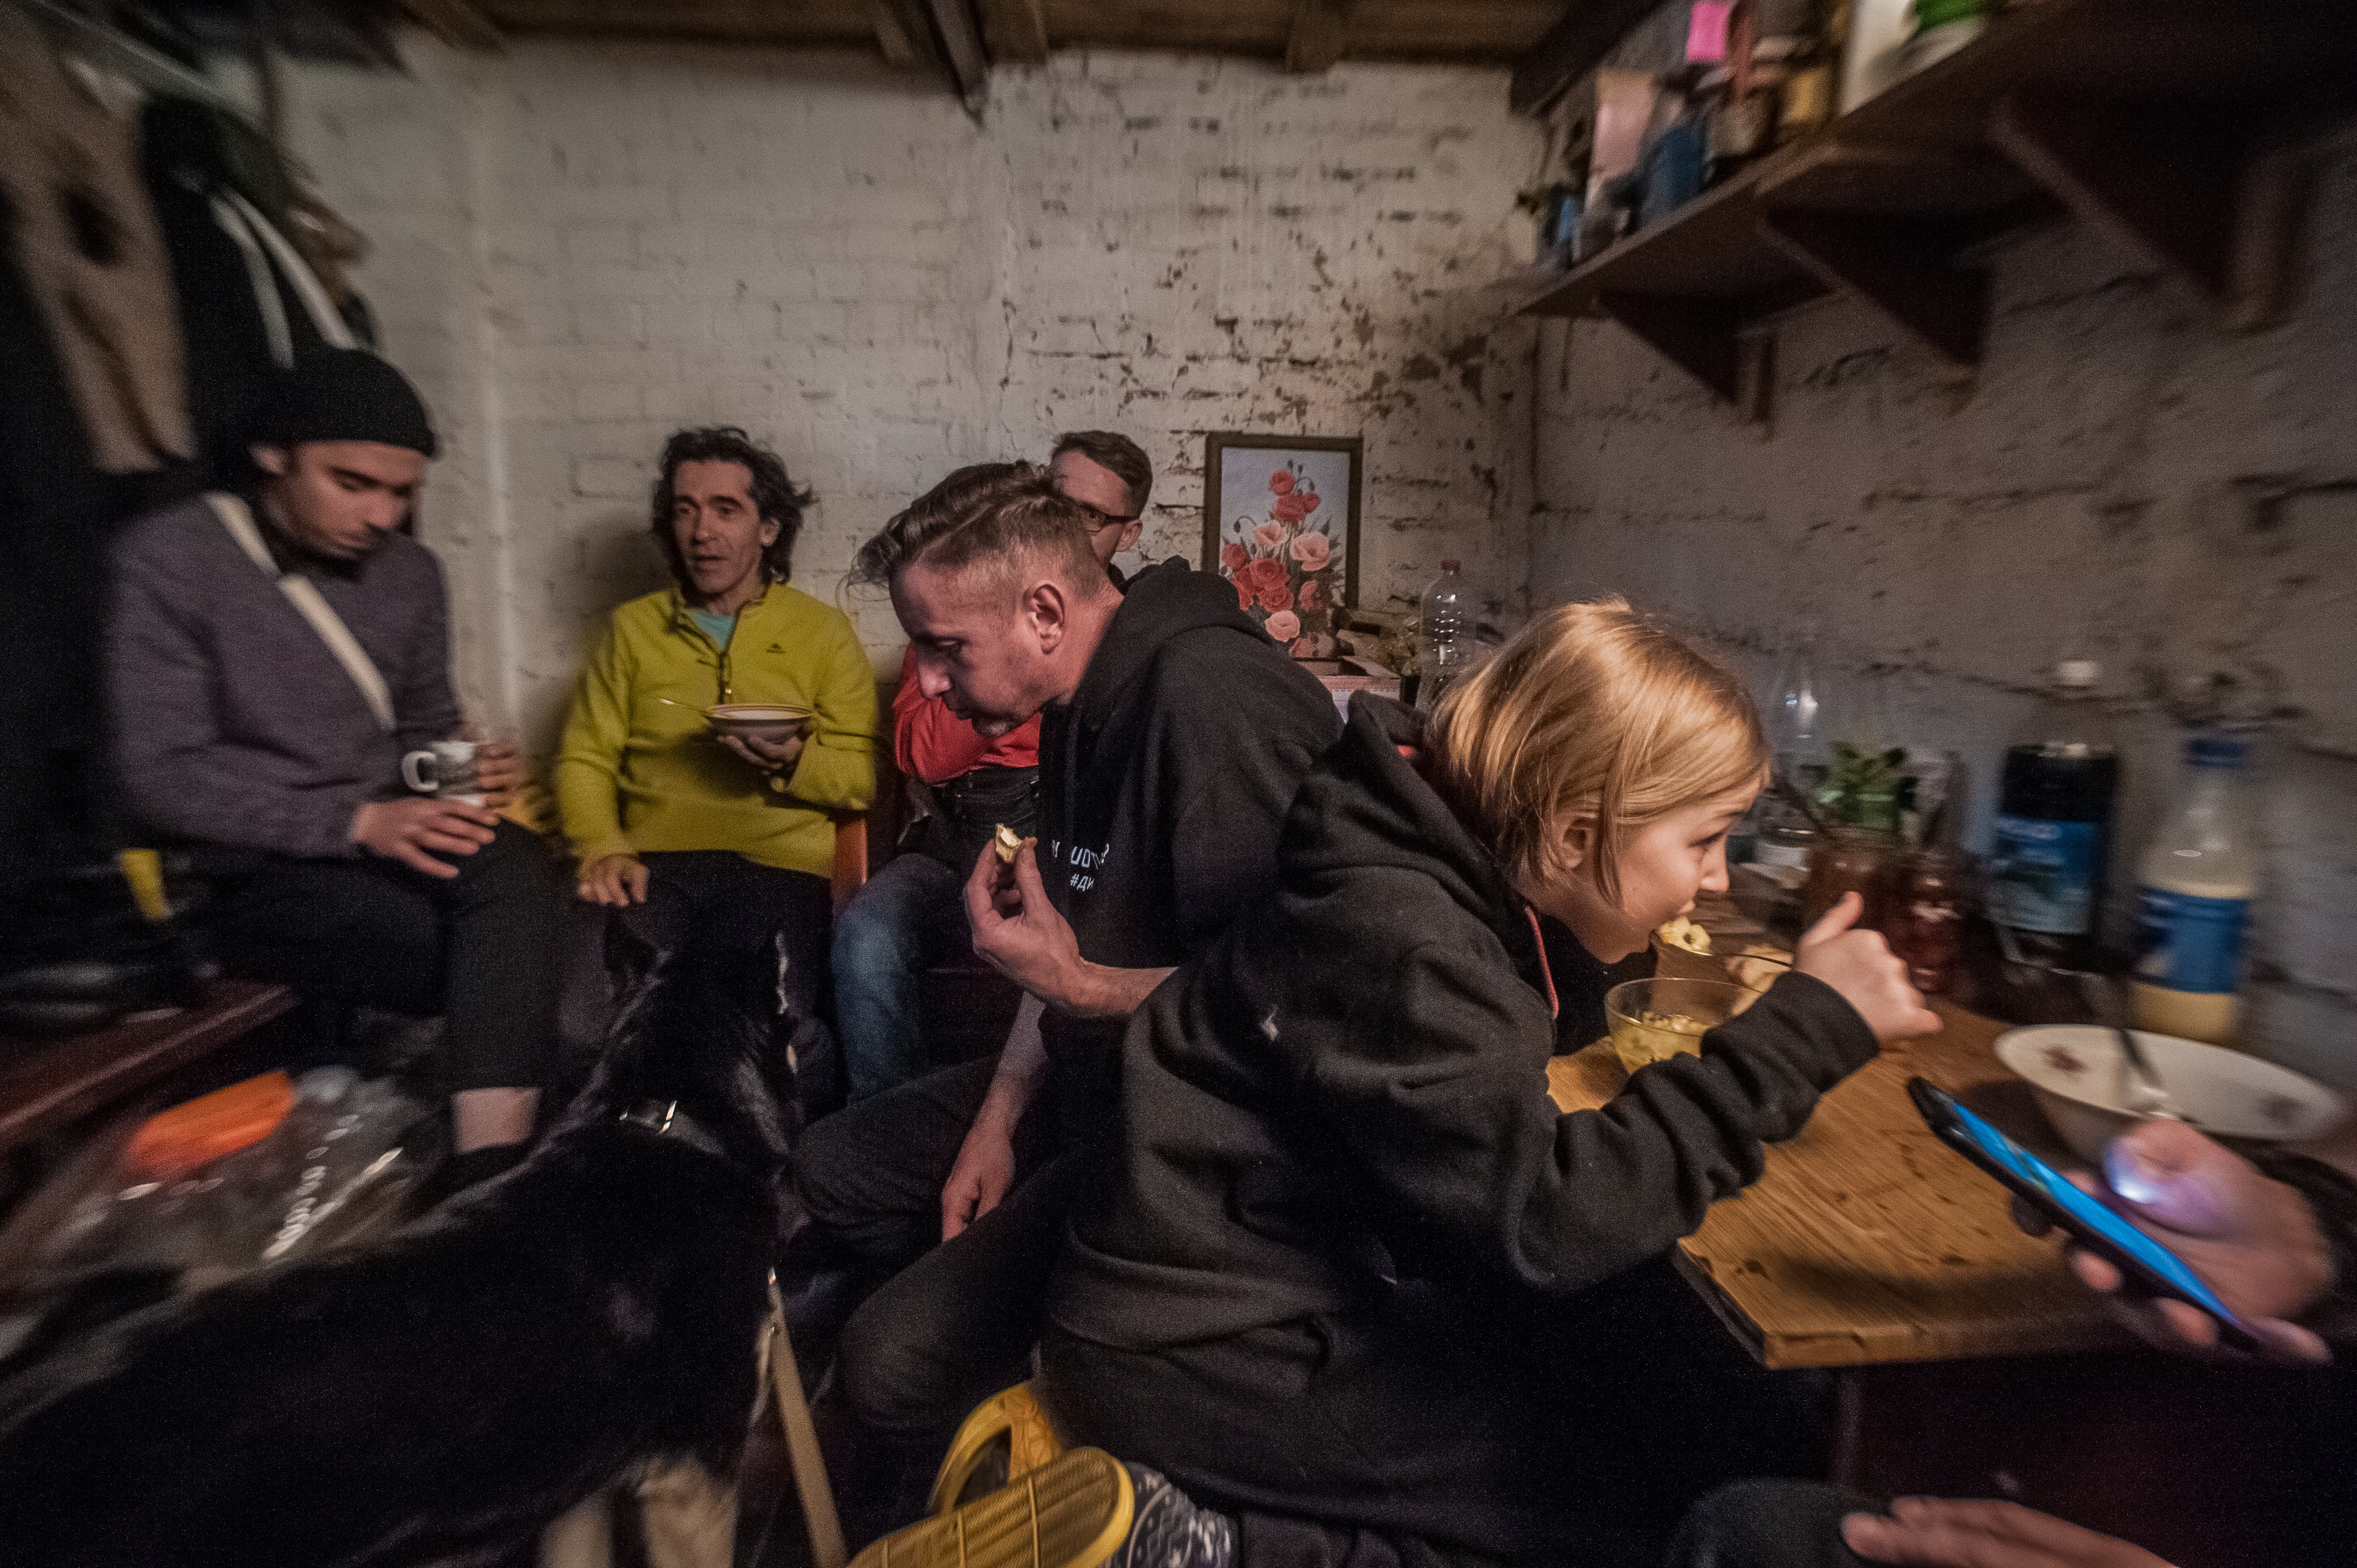 Ukrainian poet Serhiy Zhadan, actors of the Kharkiv theatre, and members of their families, have shelter in the basement of a theatre